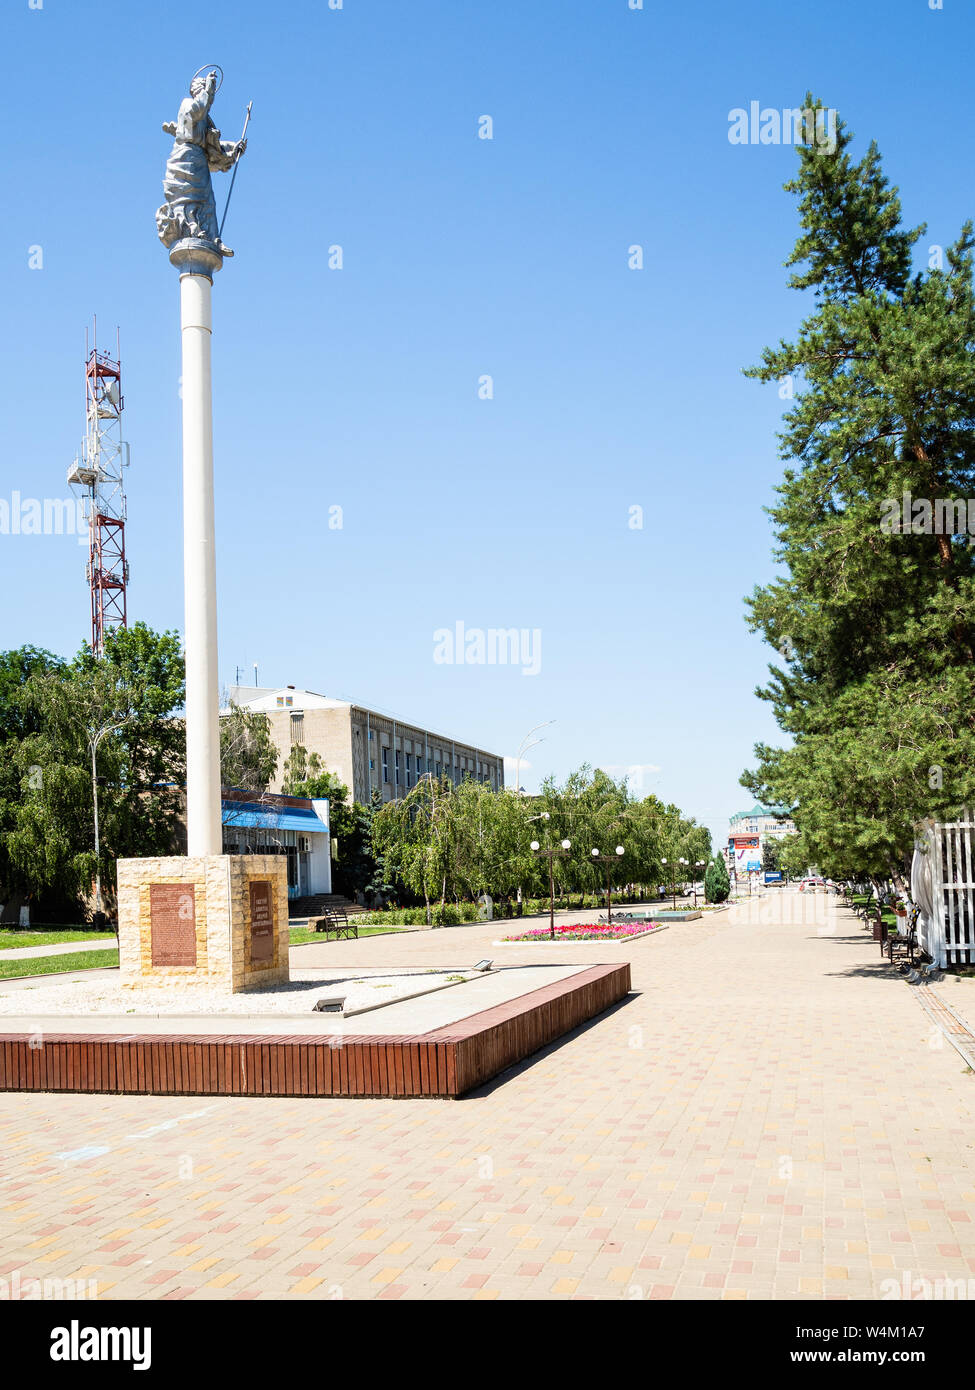 ABINSK, RUSSIA - JULY 2, 2019: Monument to First-Called Andrew the Apostle on Komsomolskaya street in Abinsk. Abinsk is town and administrative center Stock Photo